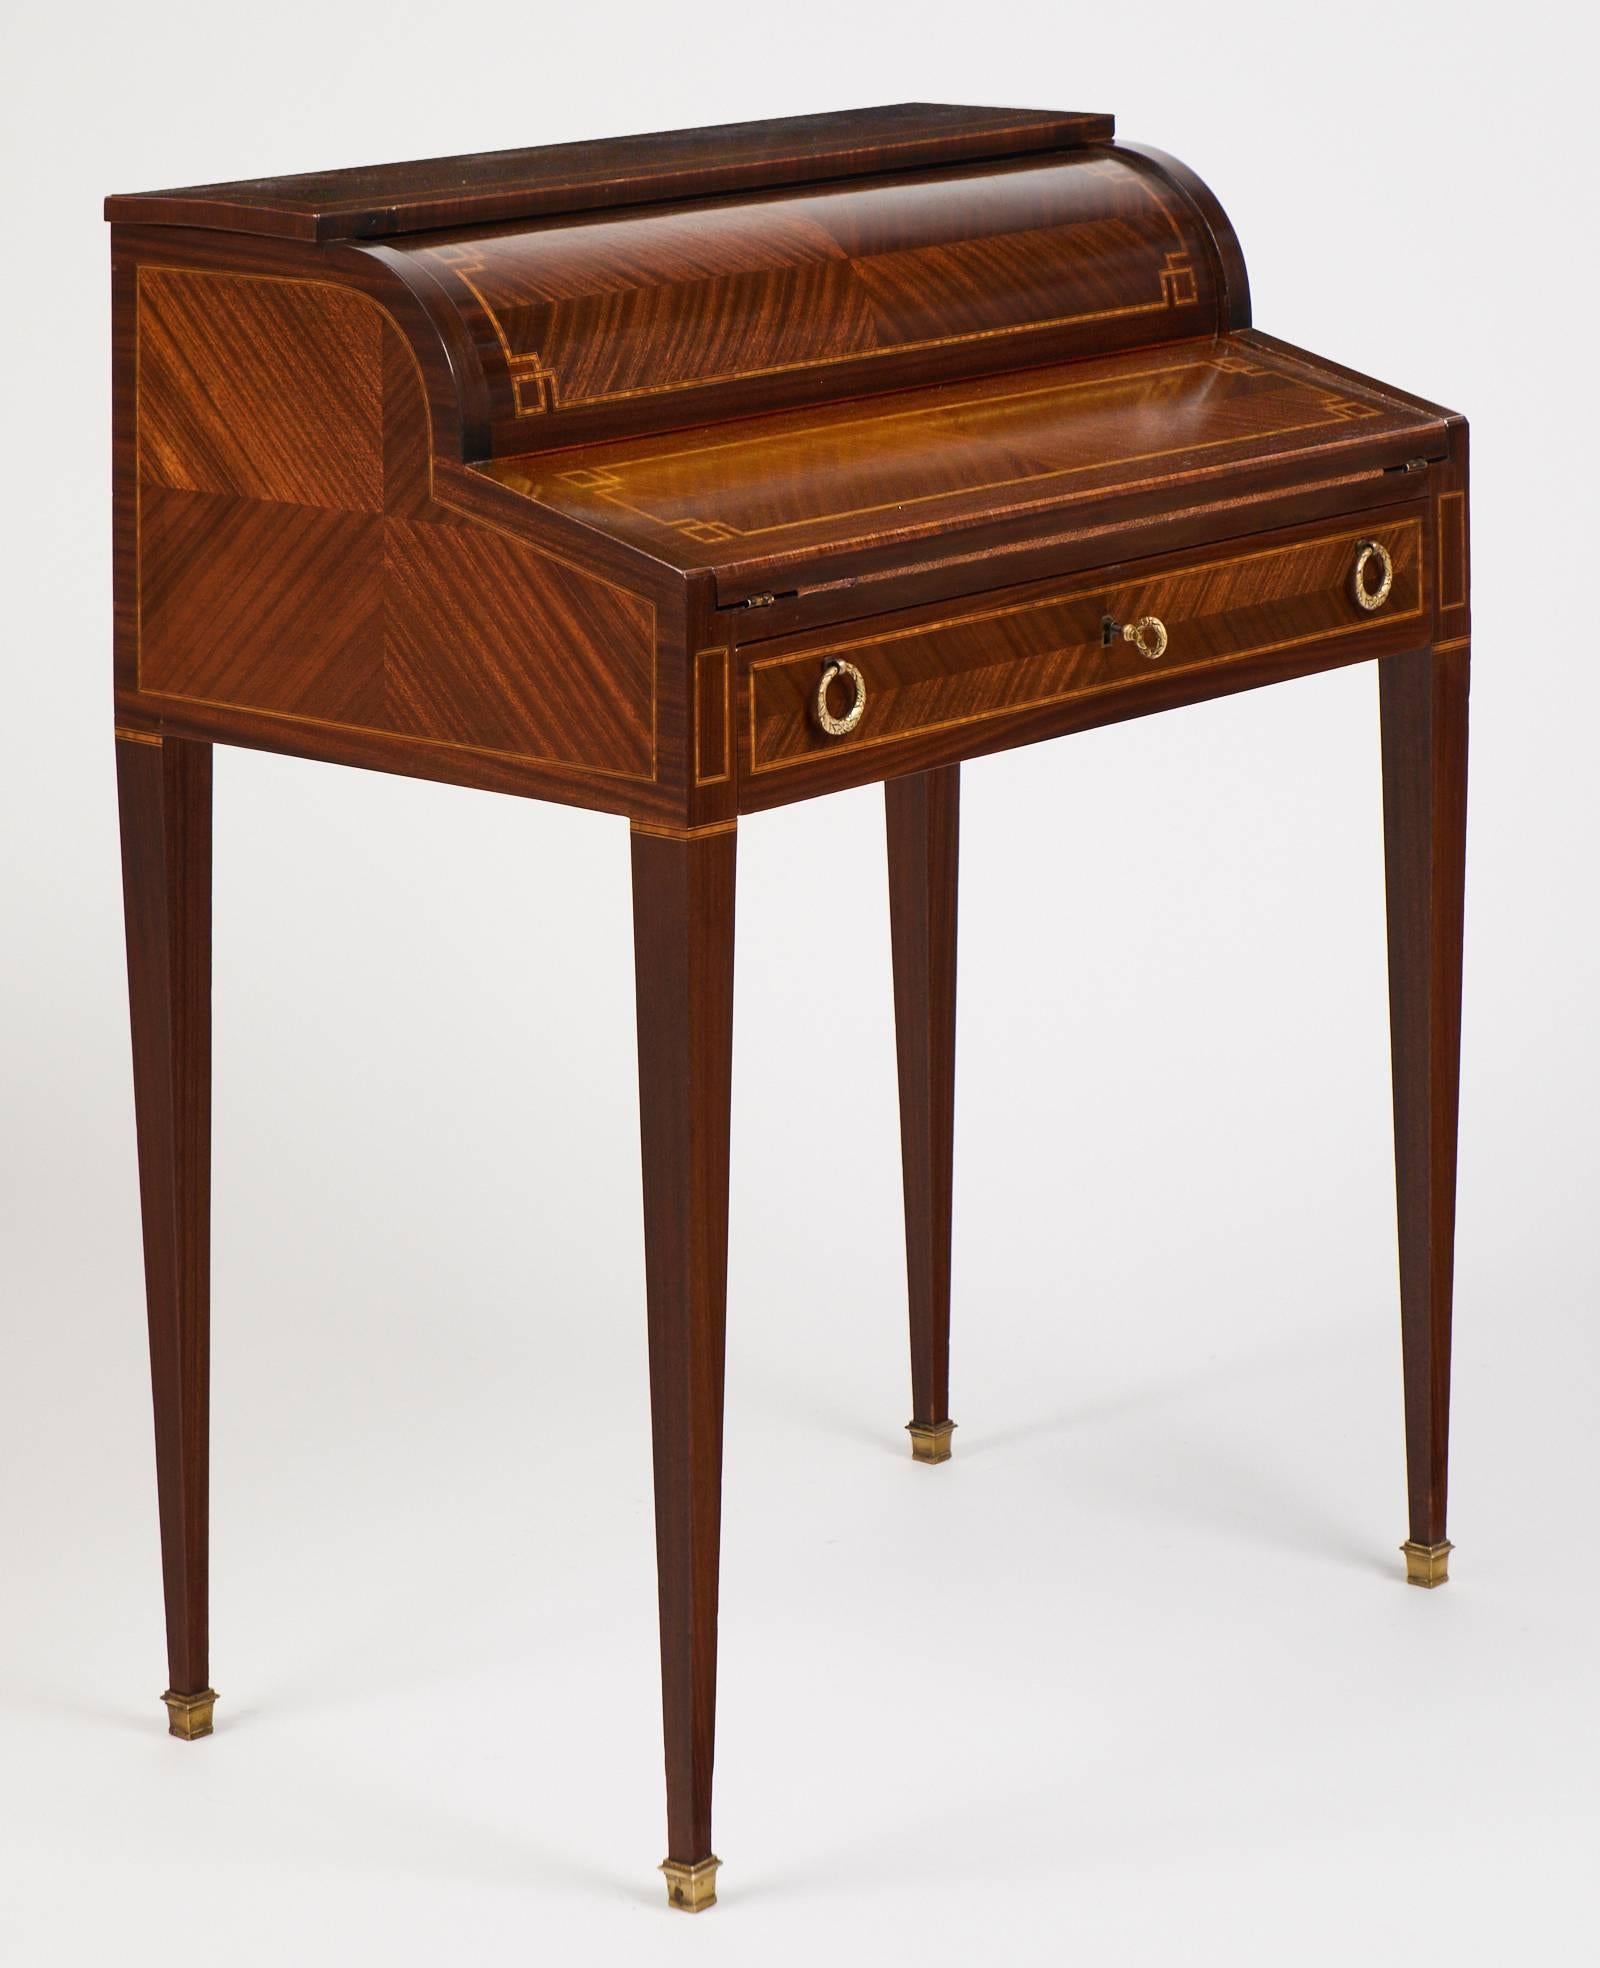 Late 19th Century French Louis XVI Leather-Top Roll Top Writing Desk